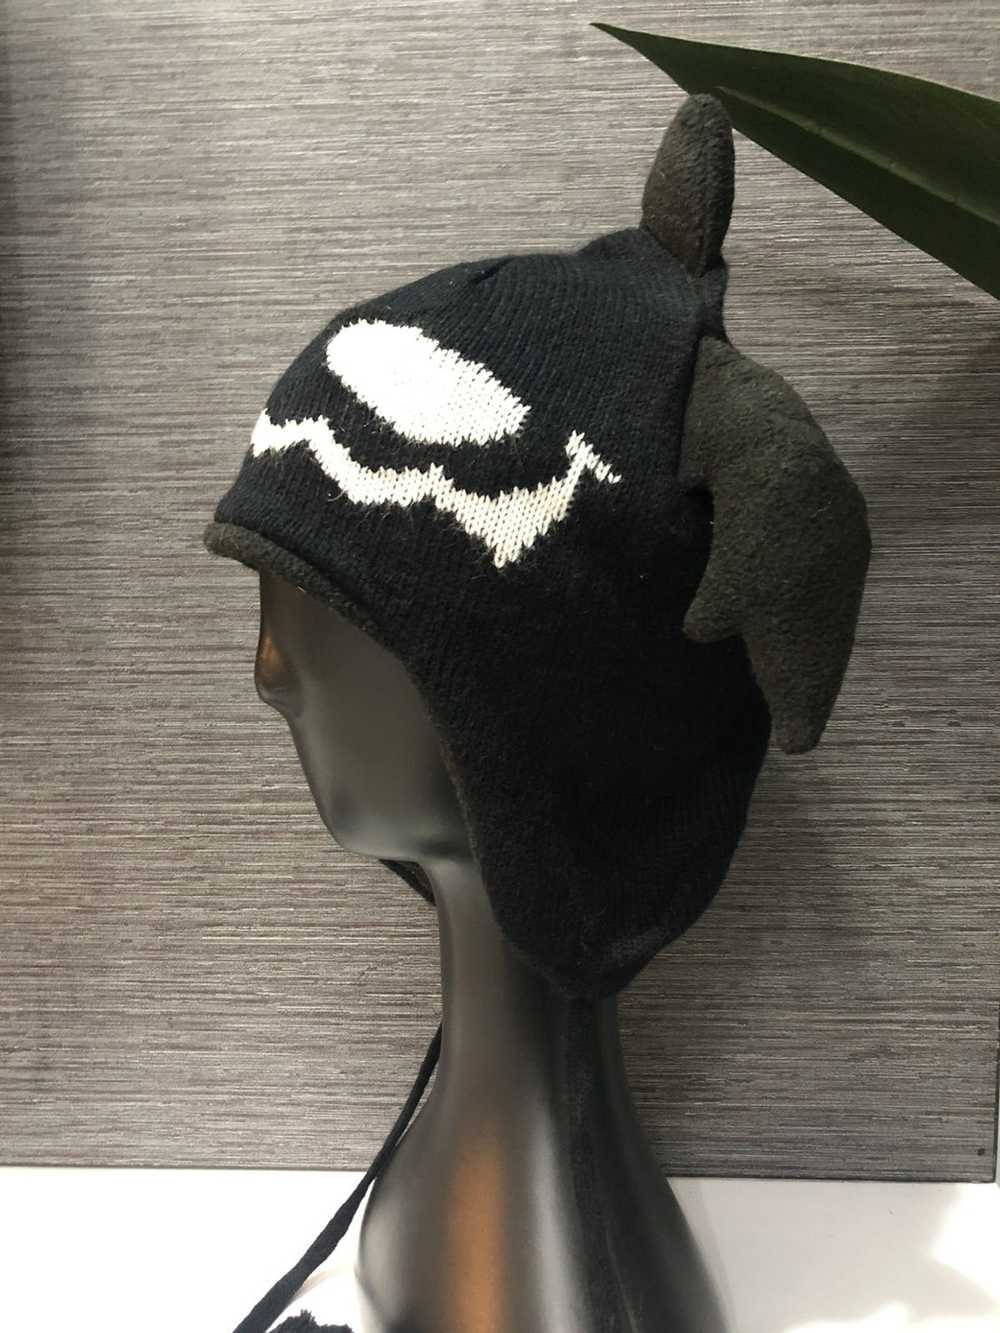 Other × Streetwear Unknown Two Horn Beanie - image 3